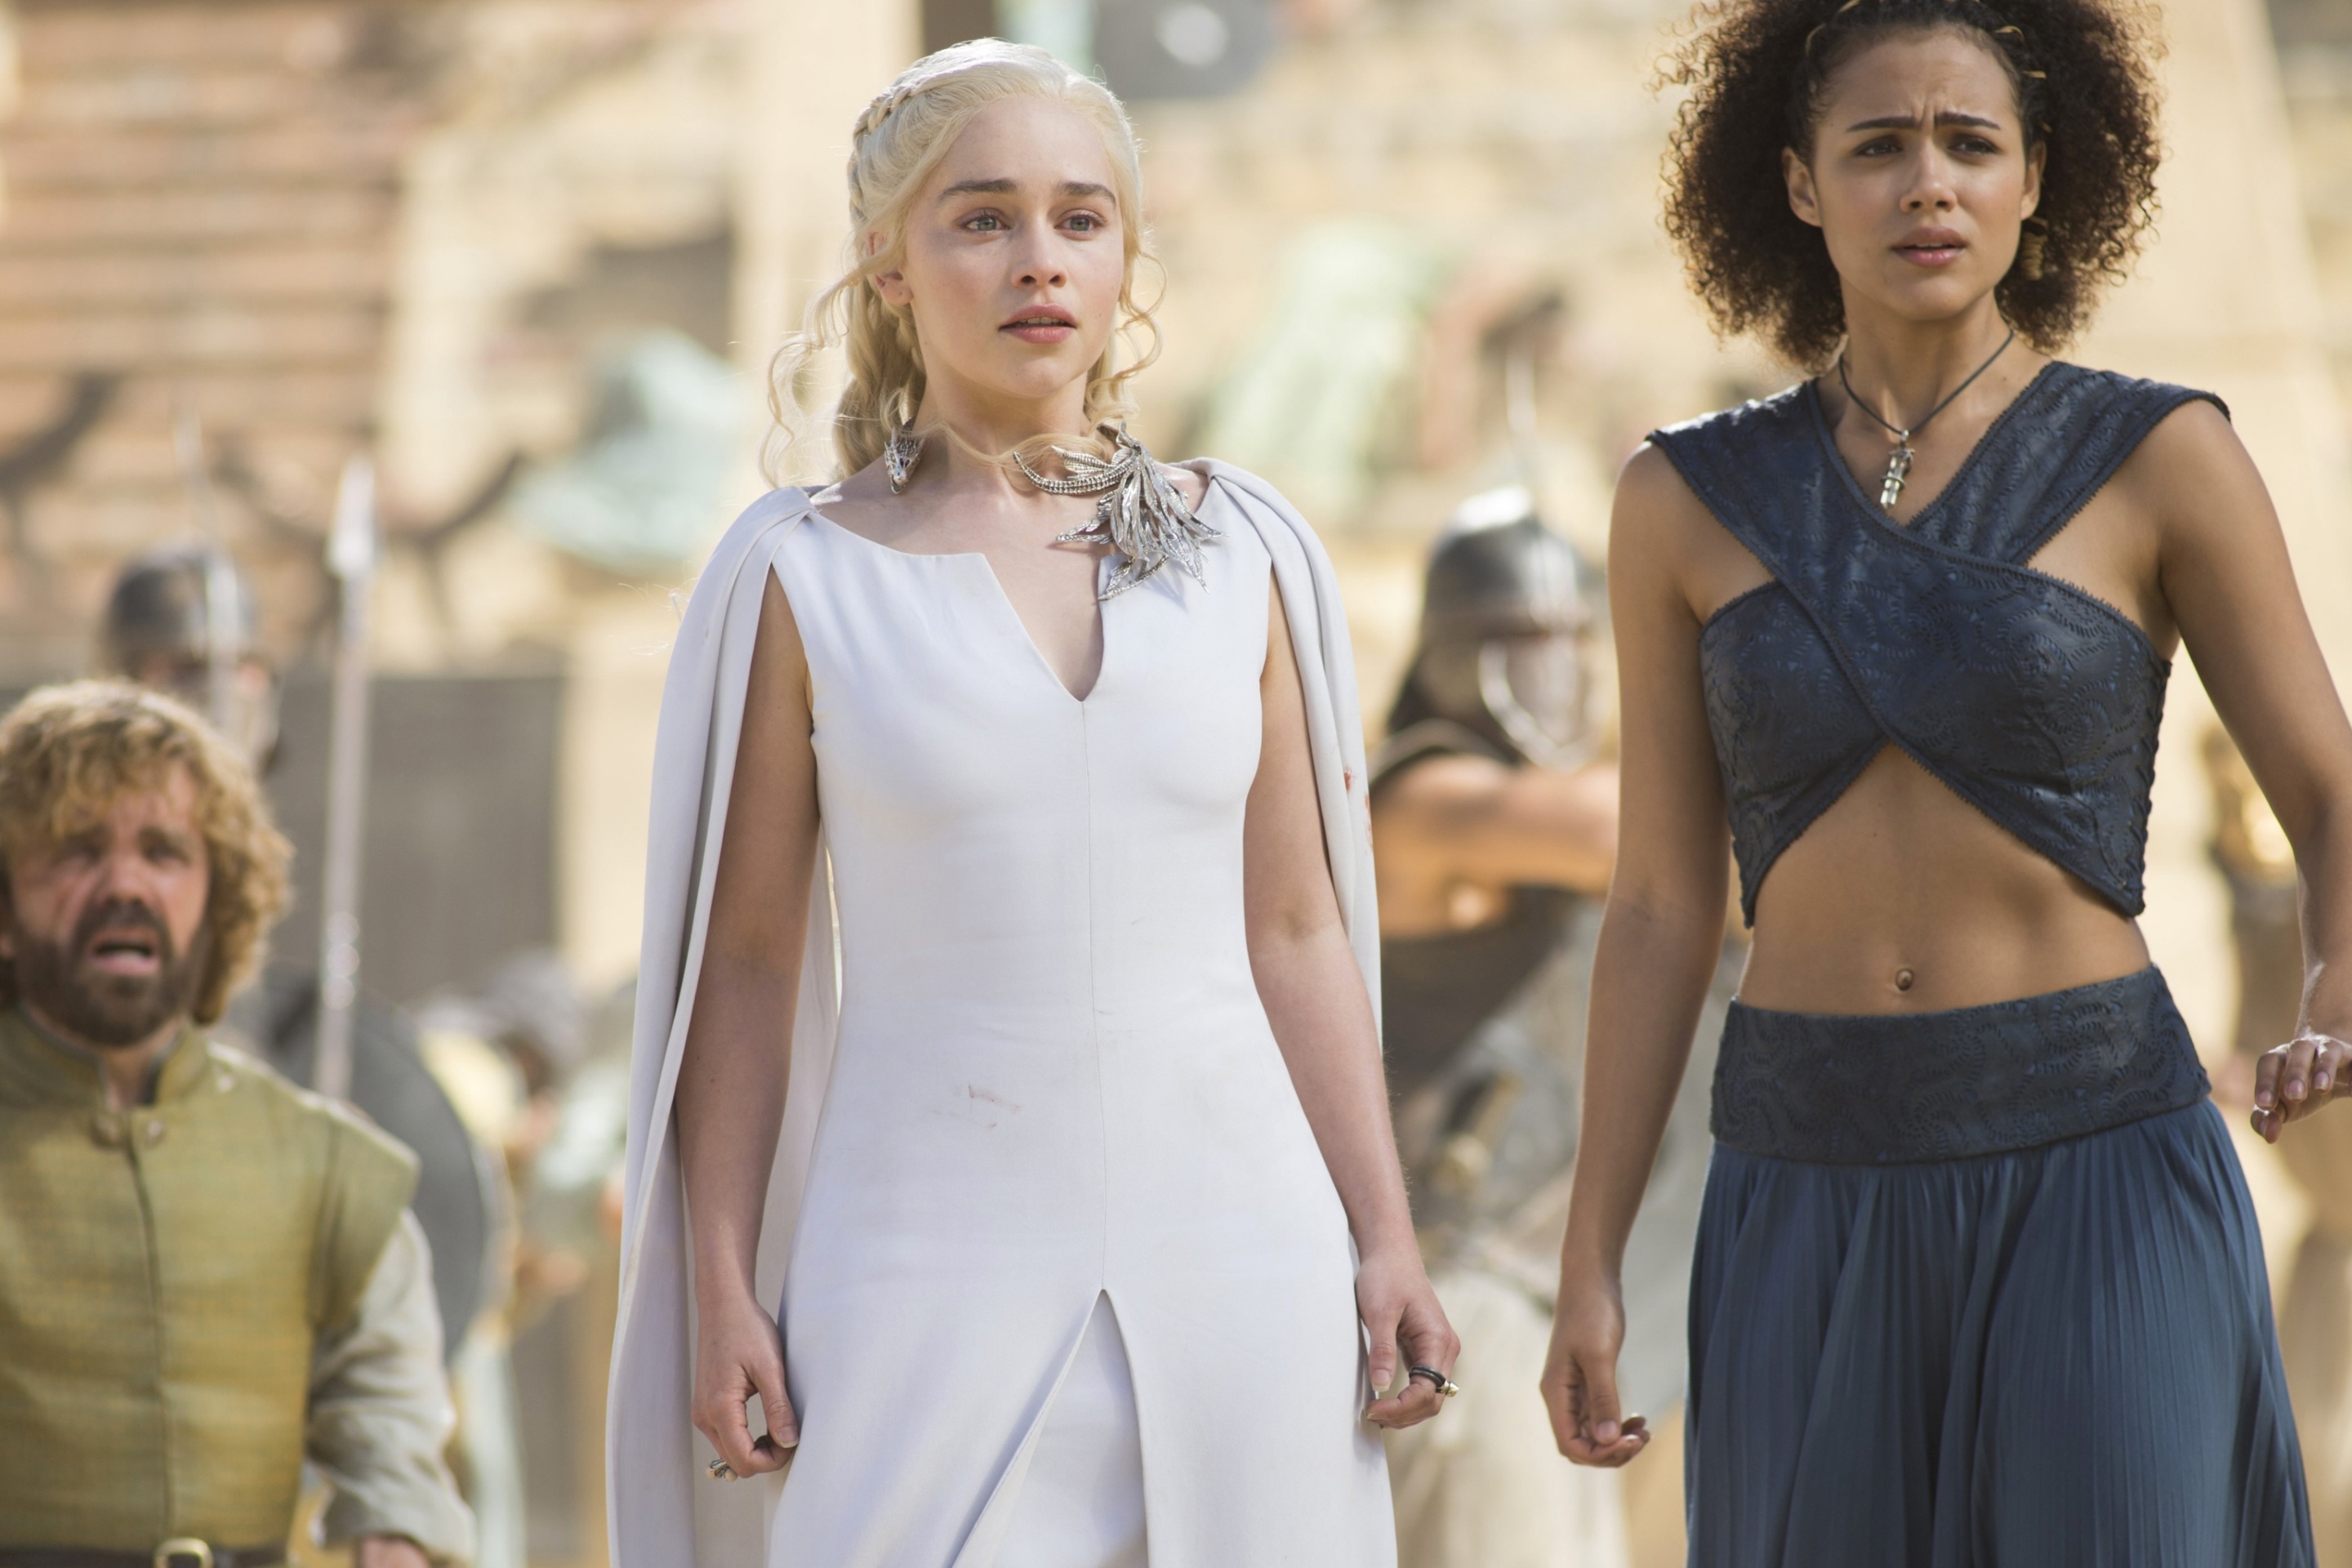 Game Of Thrones Emilia Clarke and Nathalie Emmanuel as Missandei wallpaper 2880x1920